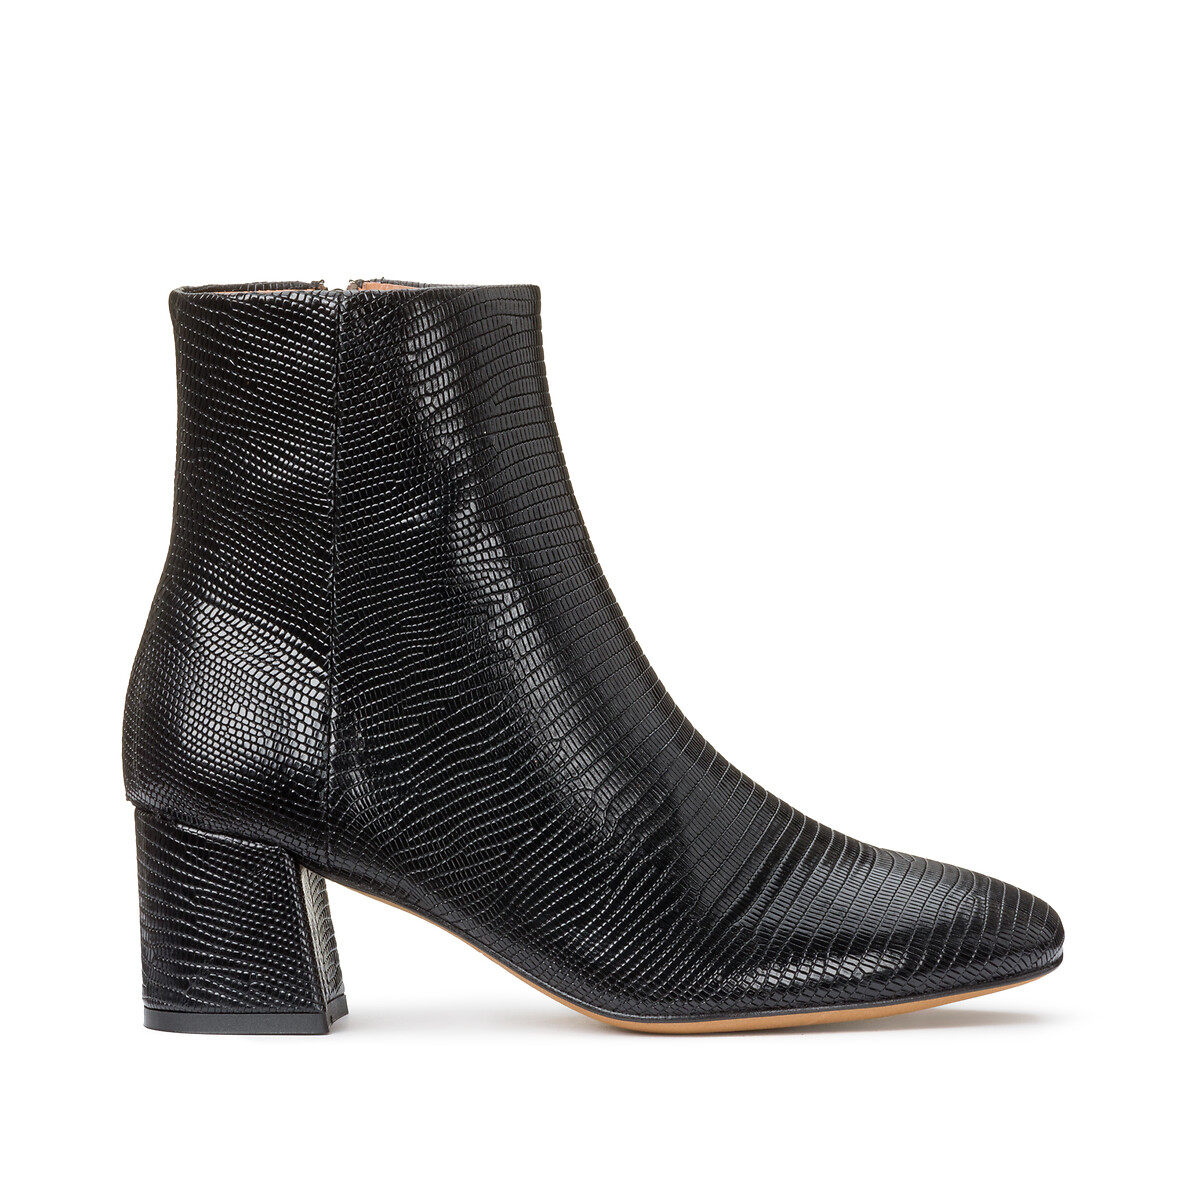 Dune Pointed Ankle Boots in Mock Croc Leather with Block Heel